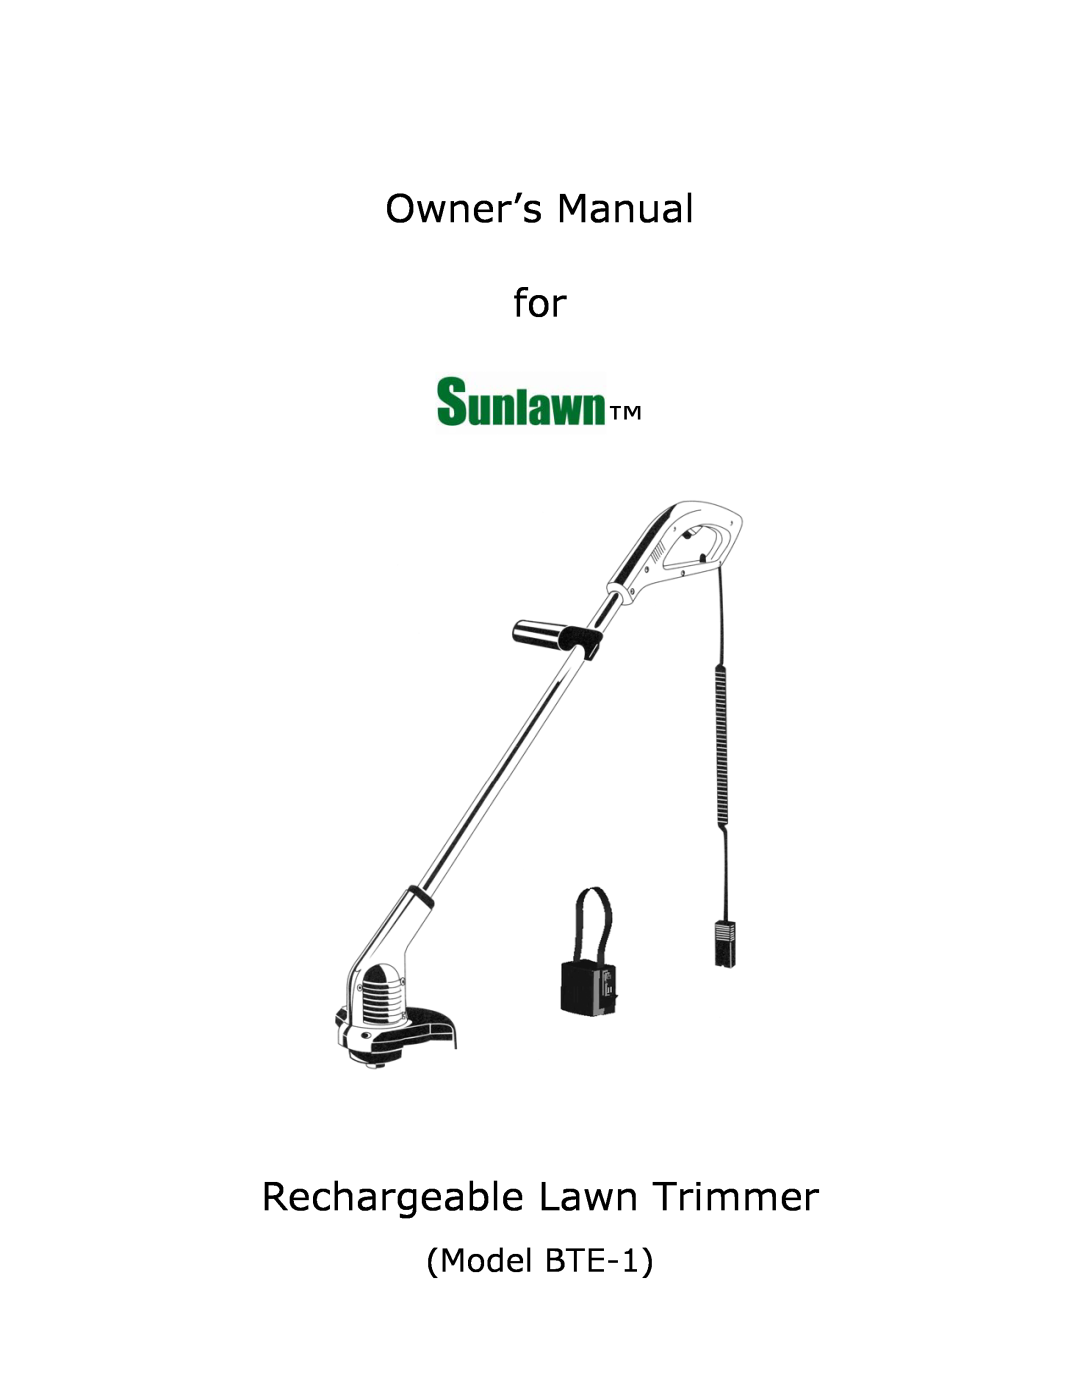 Sun Lawn owner manual Model BTE-1, Rechargeable Lawn Trimmer 